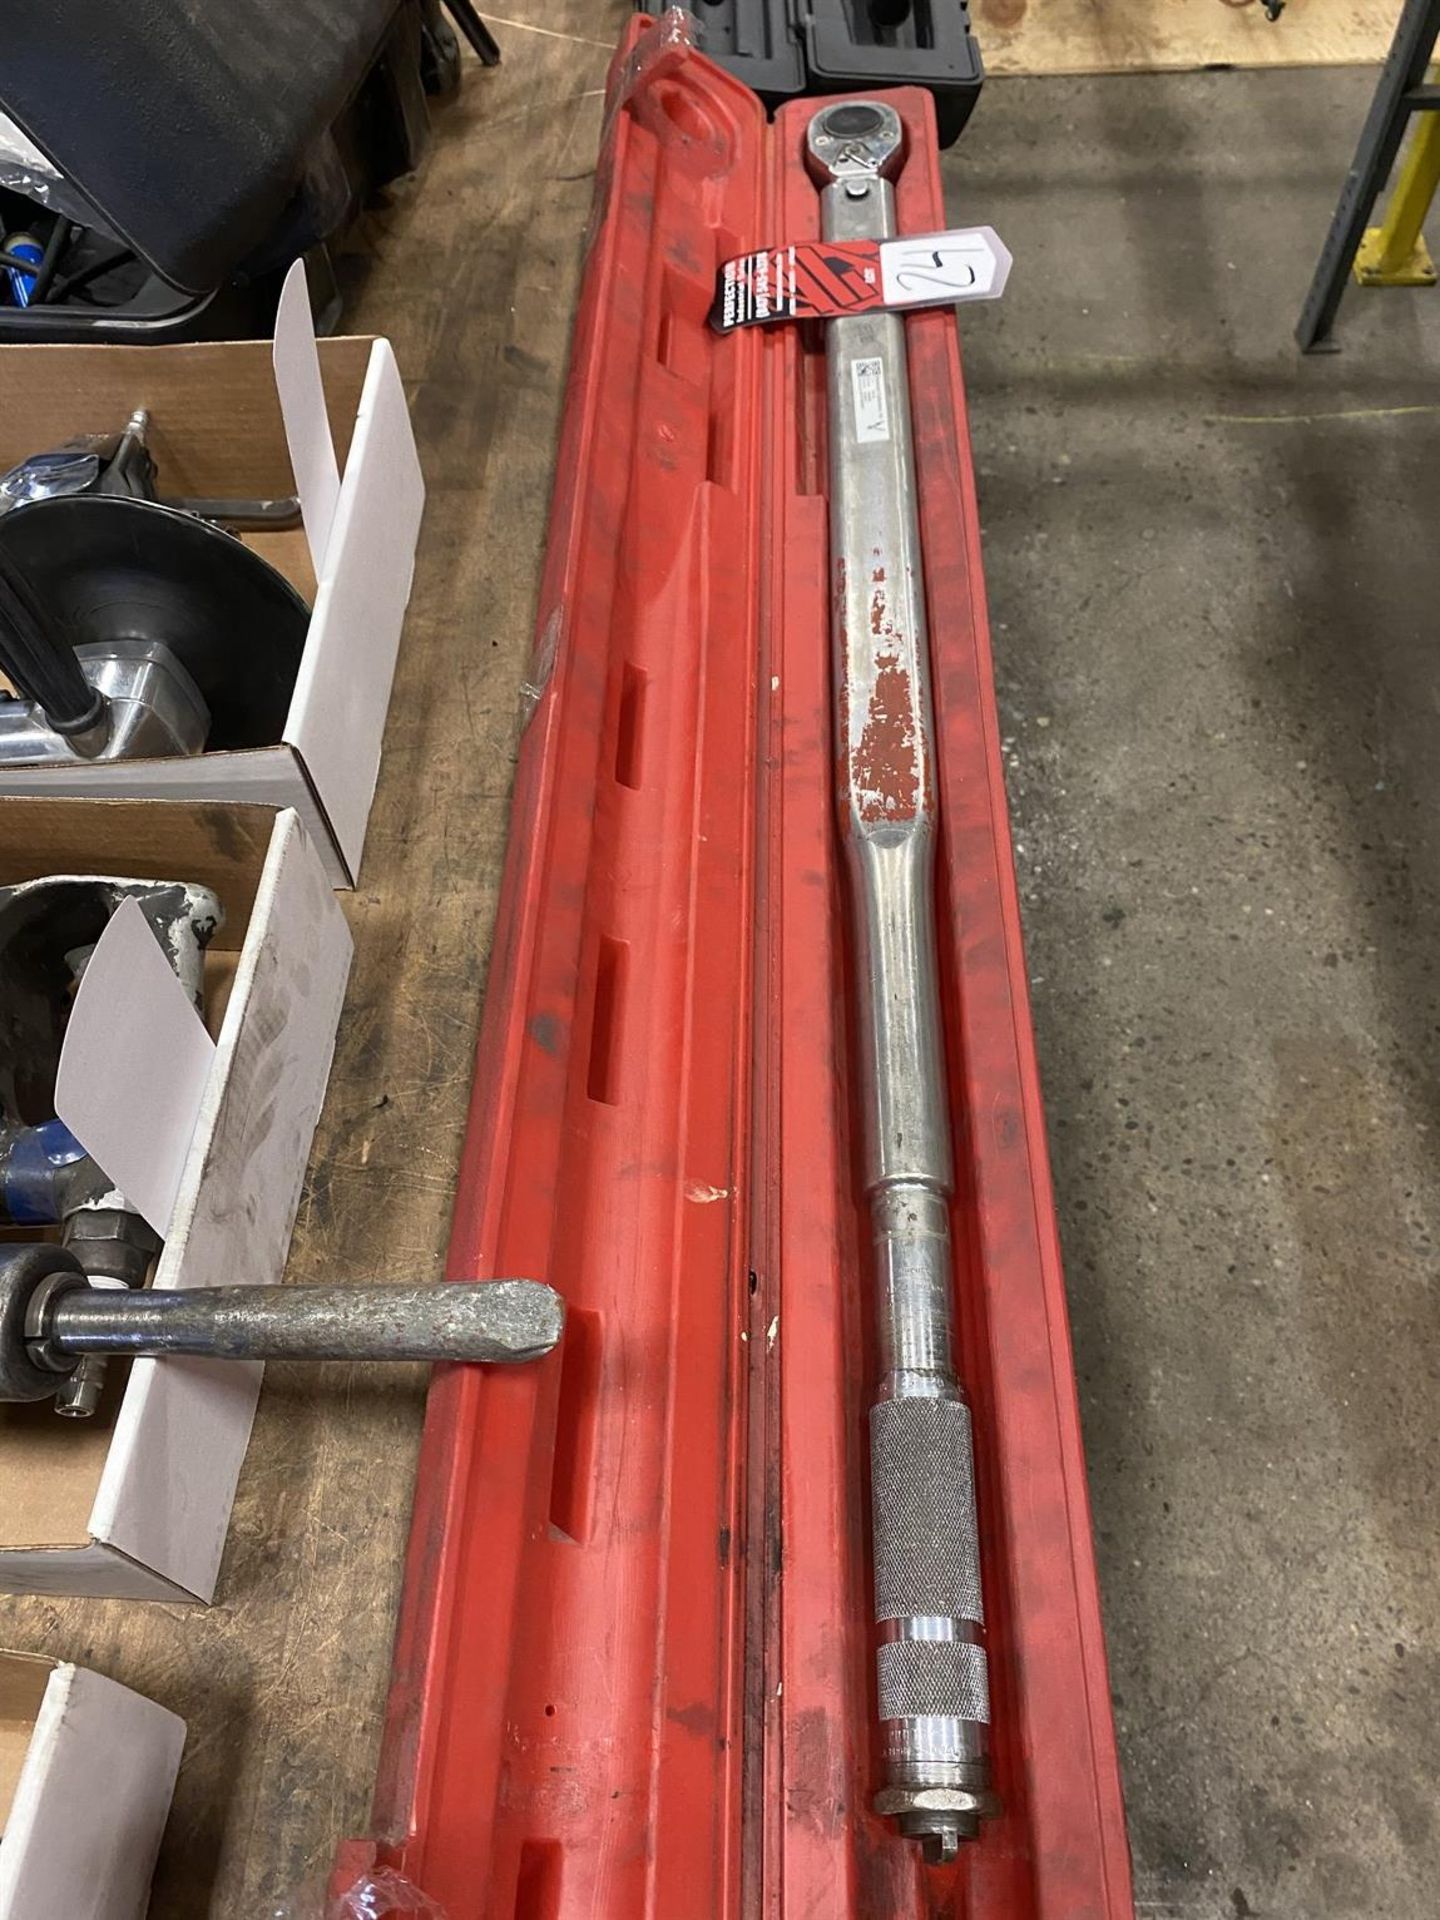 PROTO 6020 3/4" Torque Wrench - Image 2 of 2